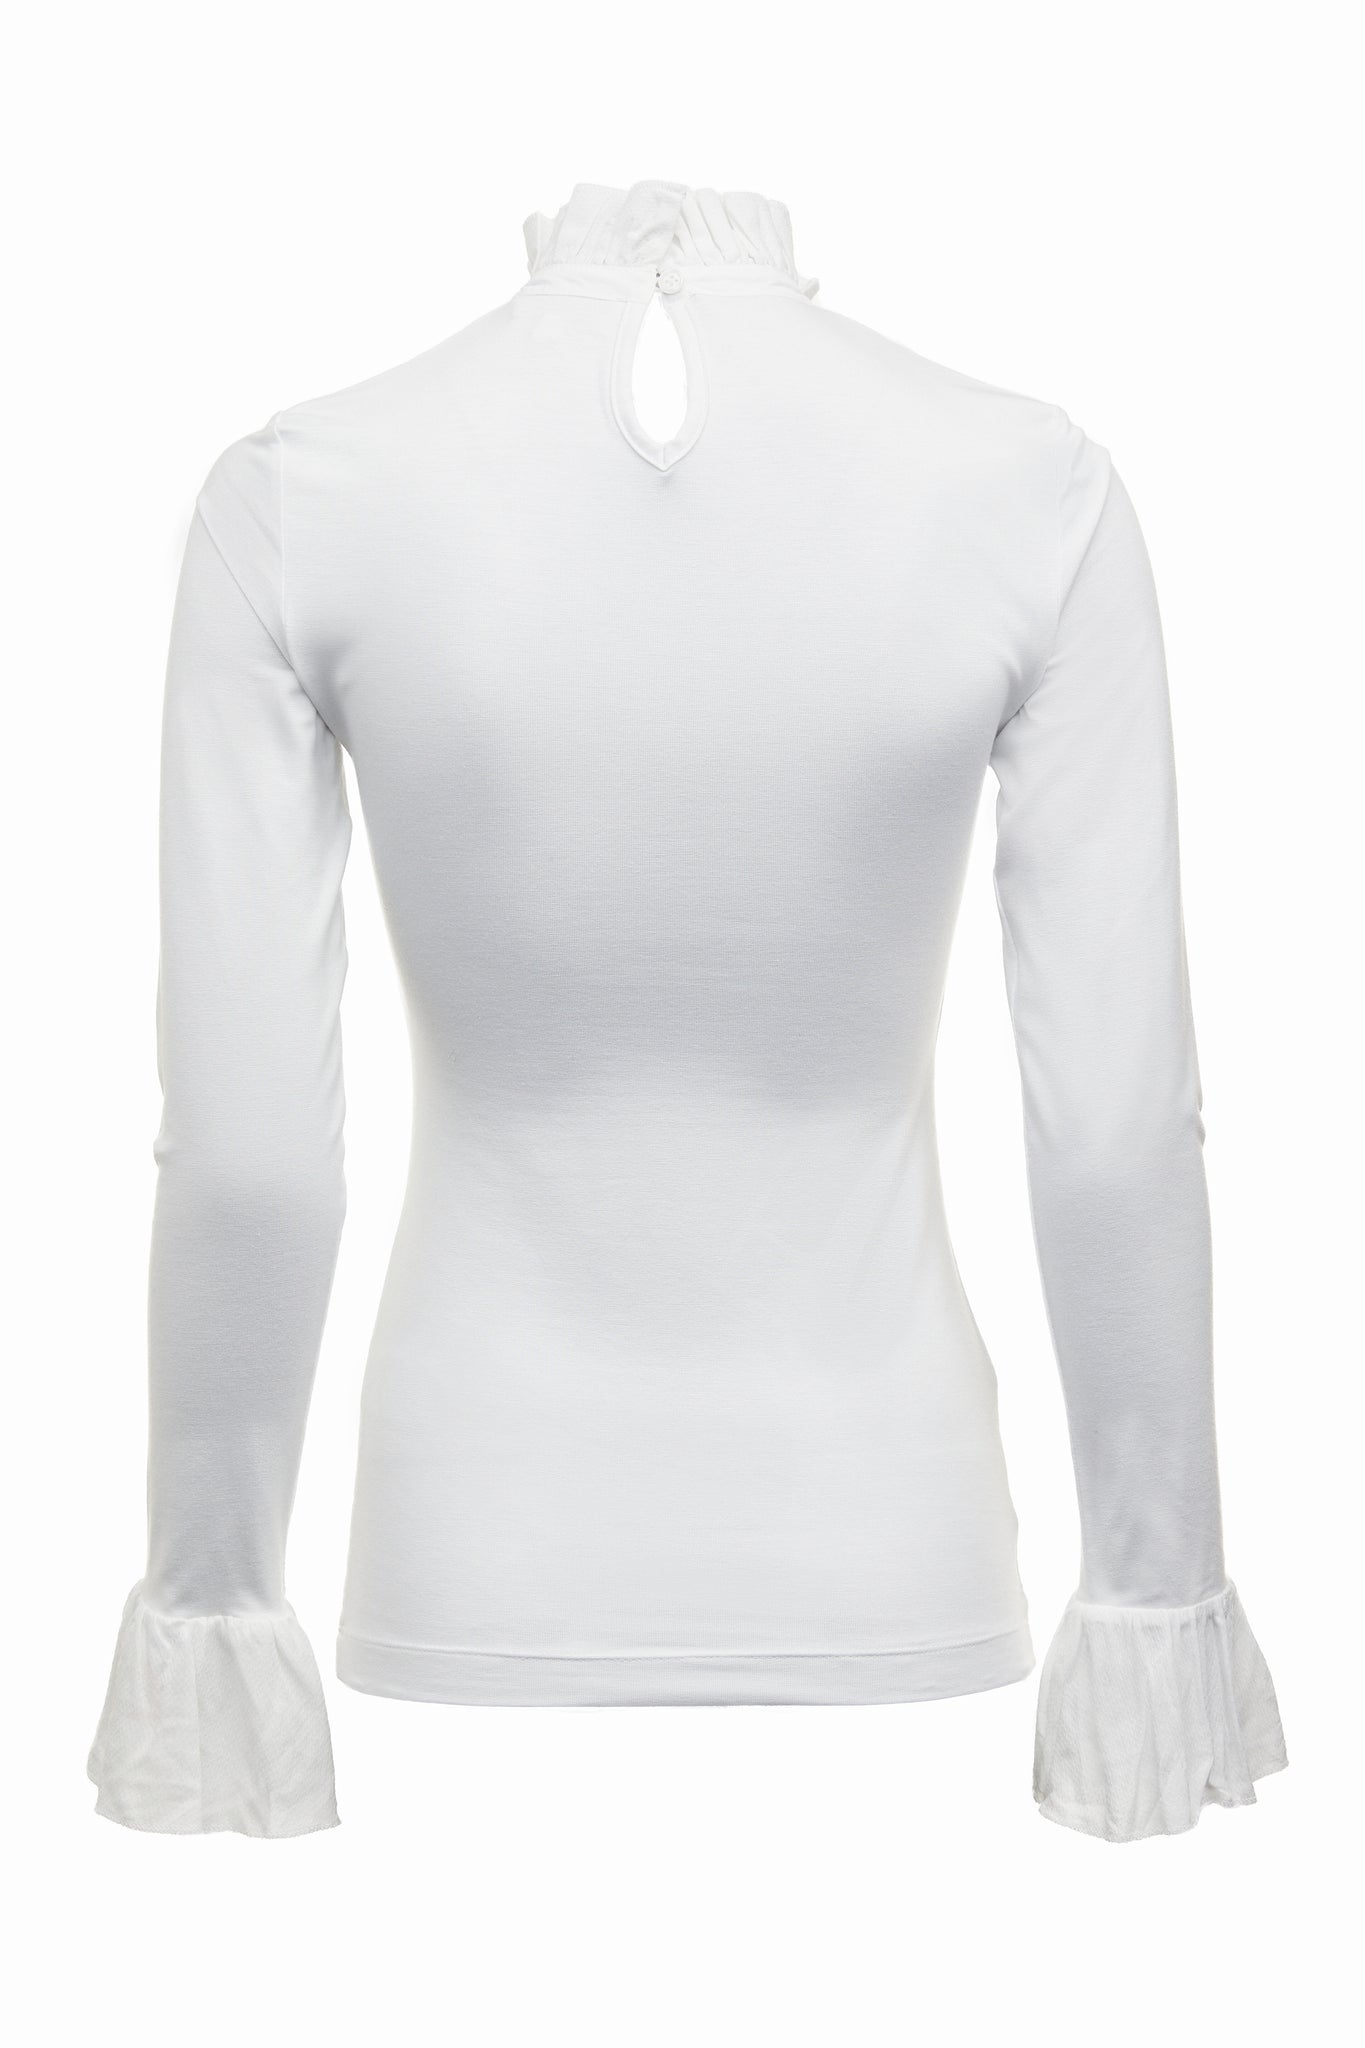 back image of a neatly fitted white long sleeve top with ruffled neckline and cuffs with frilly chest detail